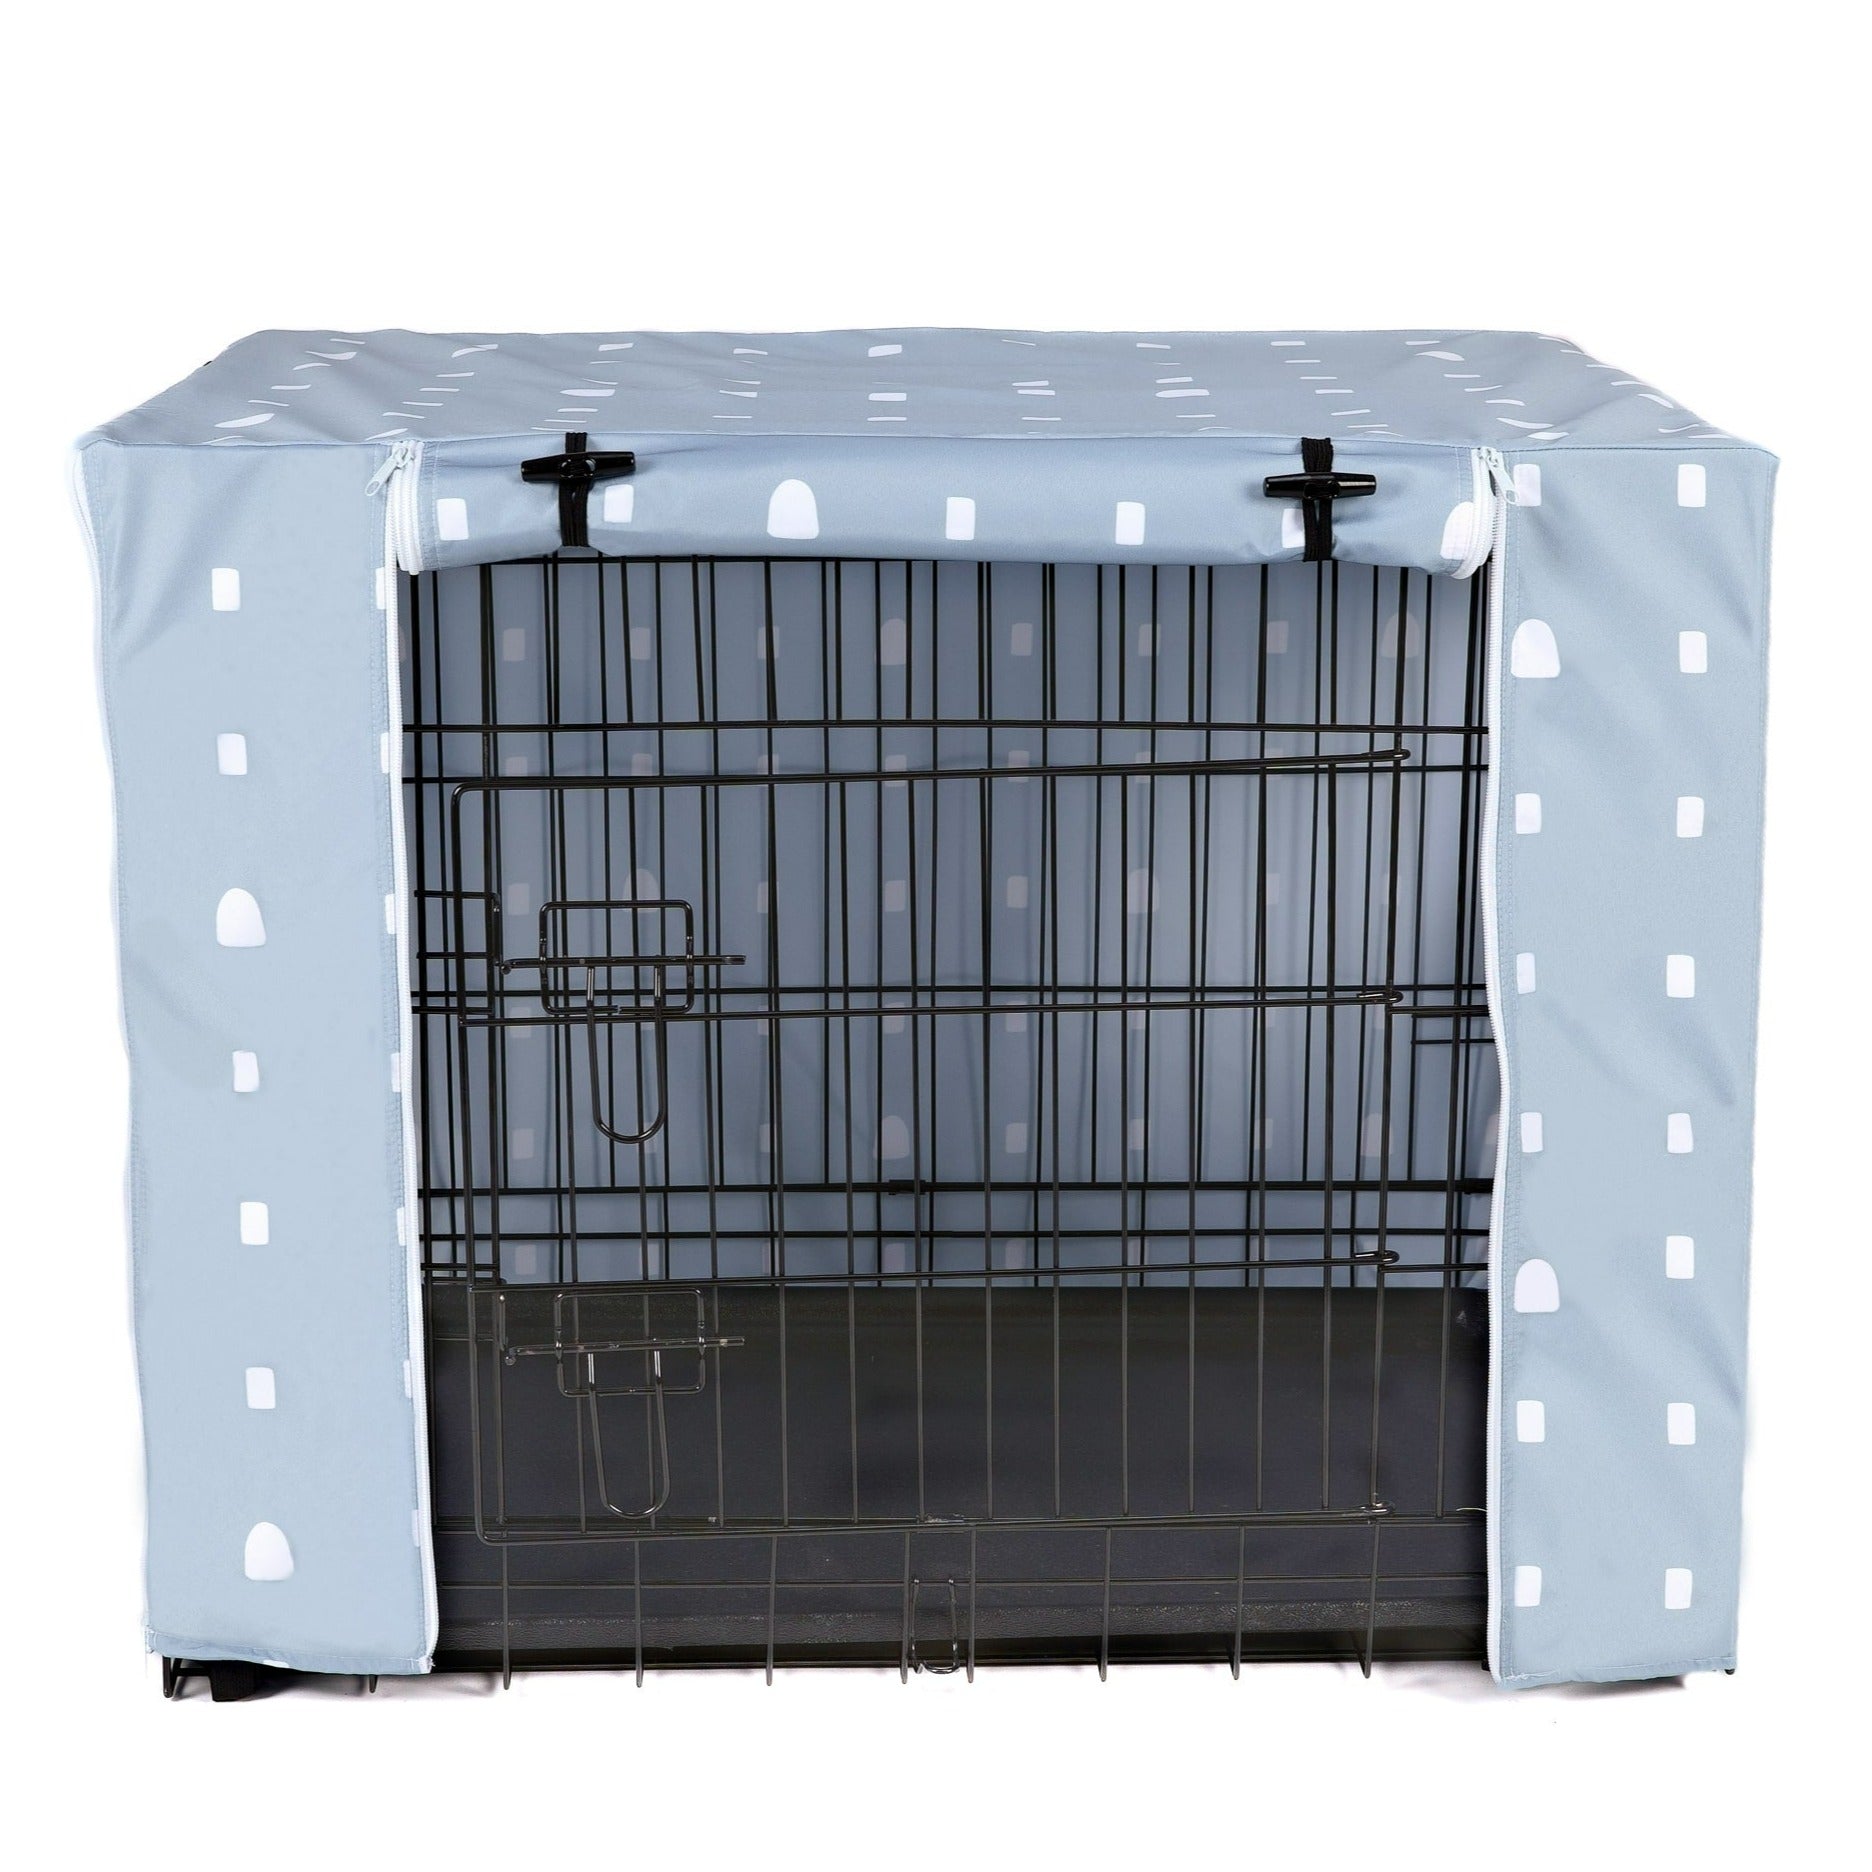 dog crate cover uk, puppy cage cover